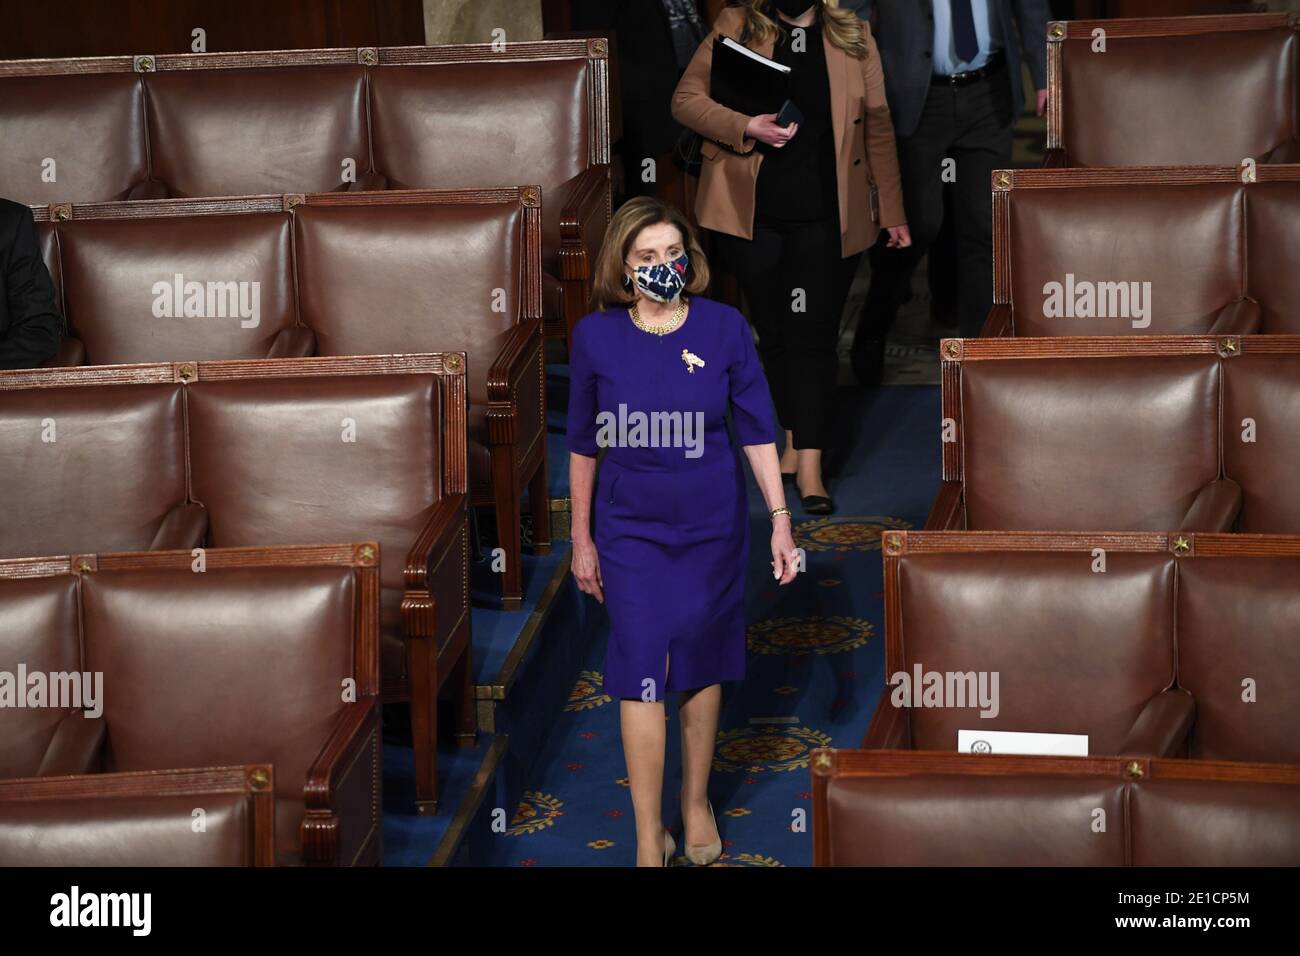 Washington, United States. 06th Jan, 2021. Speaker of the House Nancy Pelosi, D-CA, enters the chamber at the U.S. Capitol in Washington, DC on Wednesday, January 6, 2021. A joint saession of Congress counts the Electoral College votes today. Photo by Pat Benic/UPI Credit: UPI/Alamy Live News Stock Photo